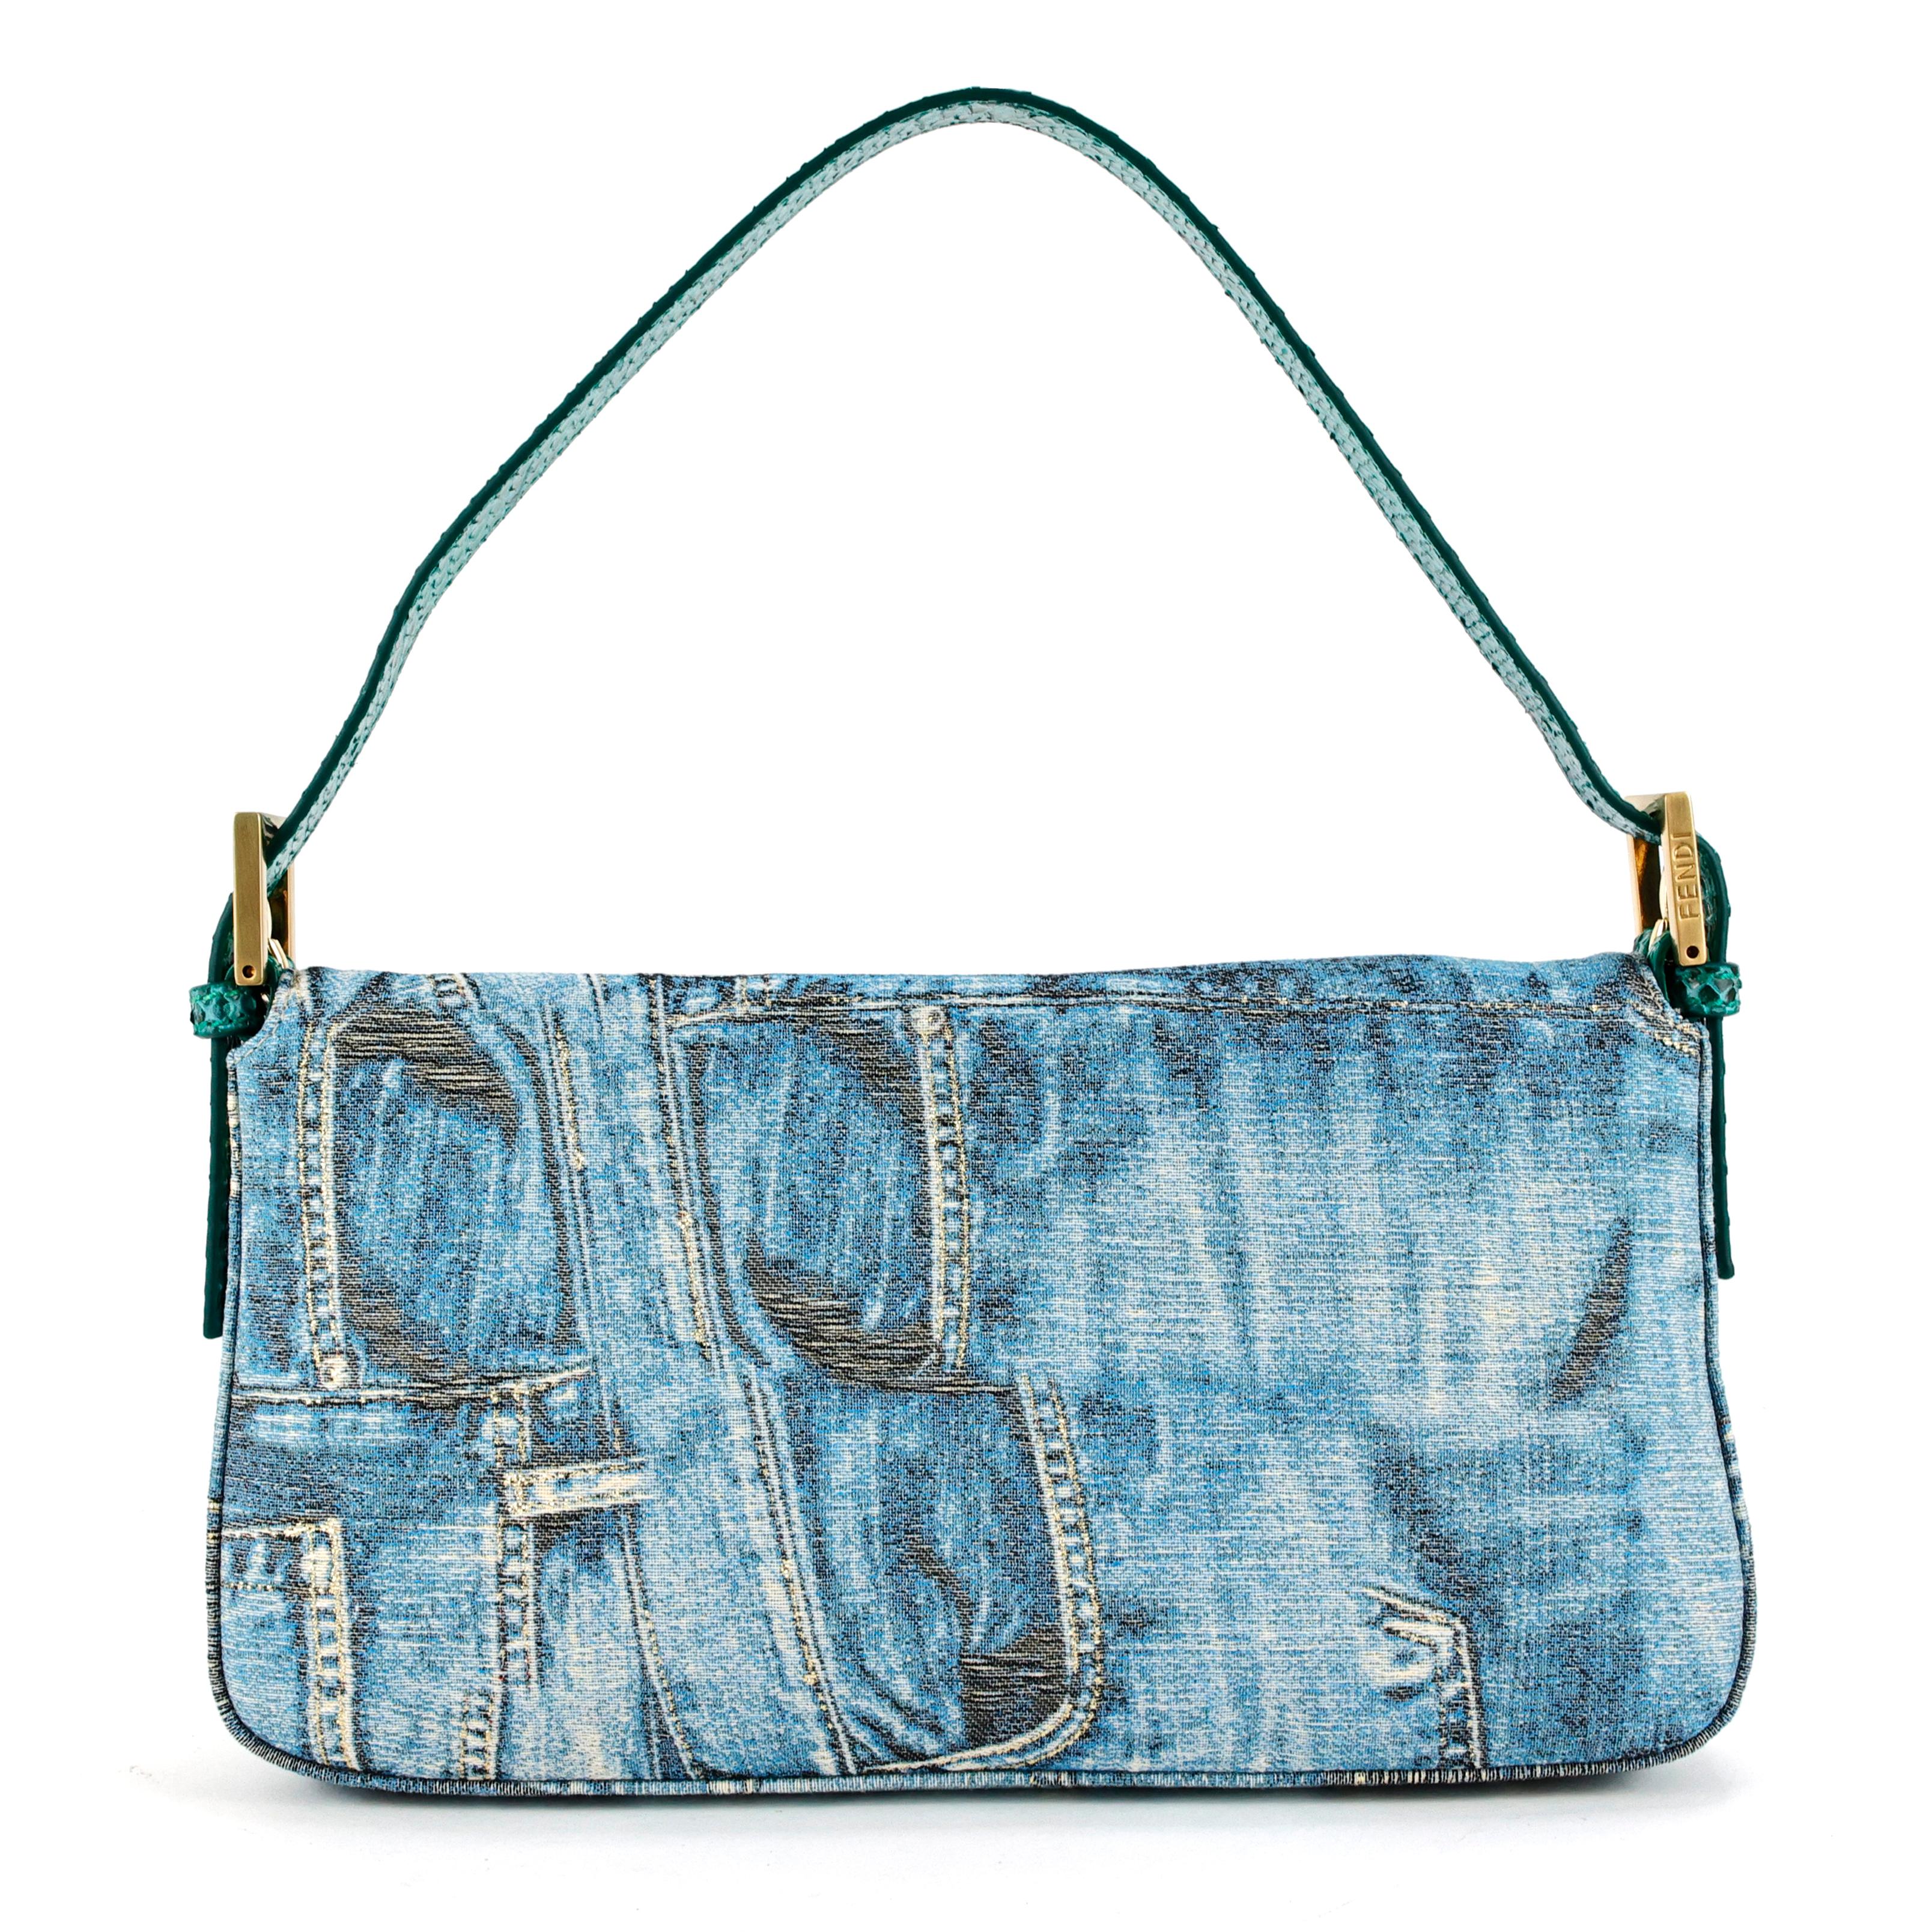 Fendi denim/jeans print lurex baguette with details in turquoise snake leather, gold hardware, double F clasp embellished with a natural stone. This  bag was featured in the Baguettemania exhibition celebrating 15 years Baguette at Colette Paris and